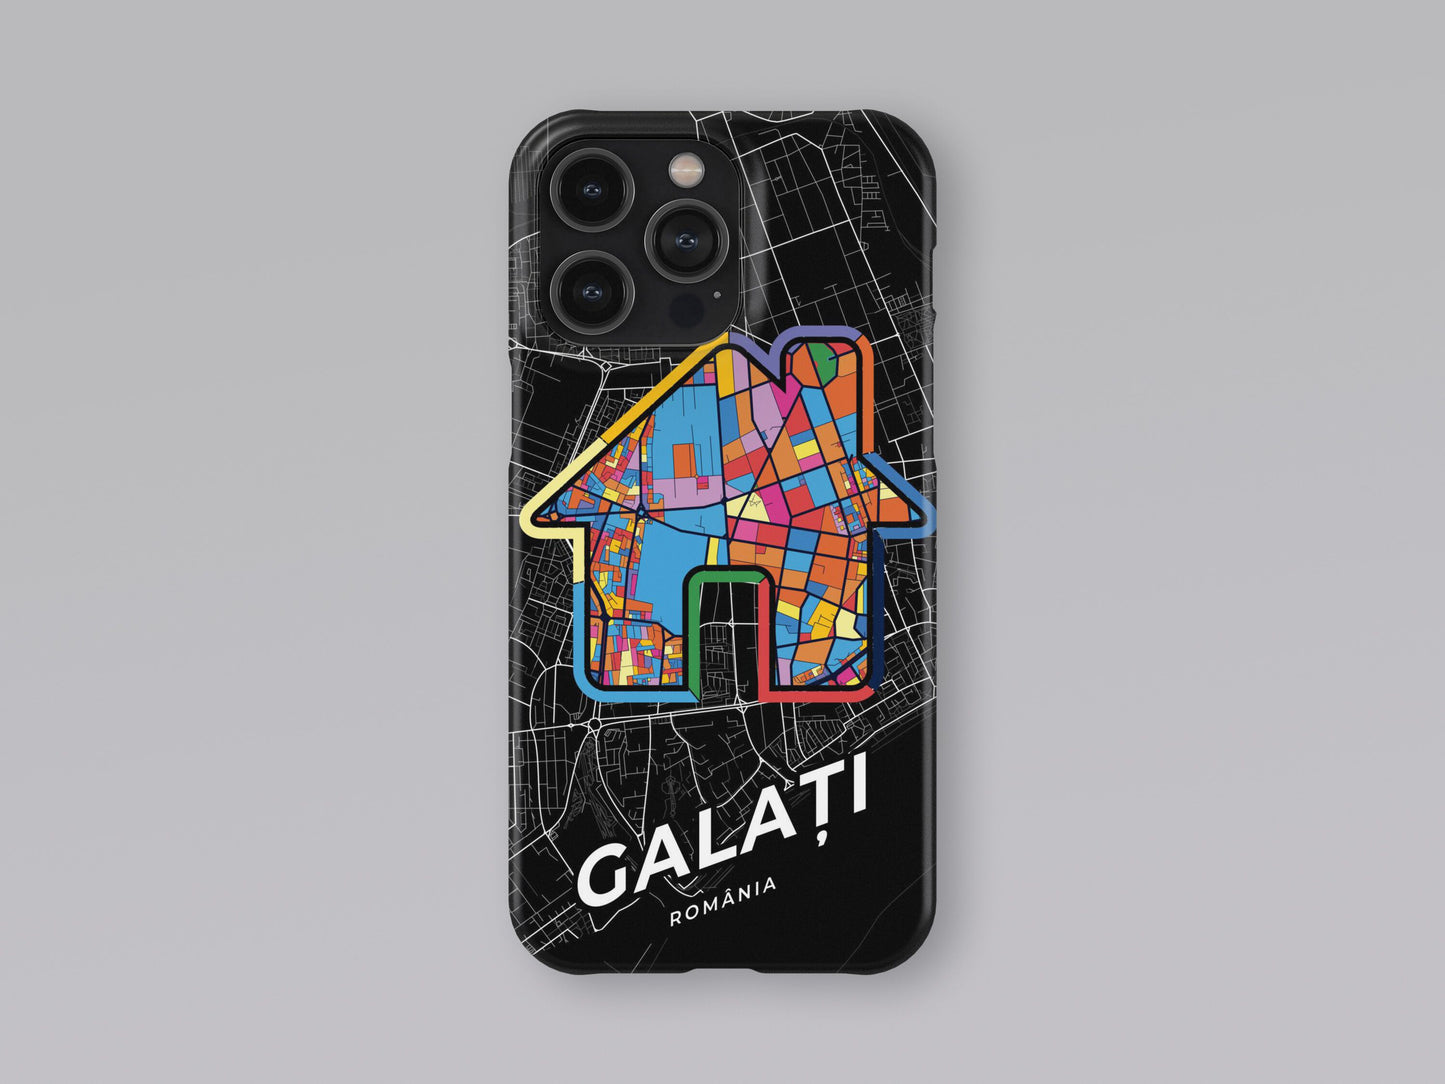 Galați Romania slim phone case with colorful icon. Birthday, wedding or housewarming gift. Couple match cases. 3